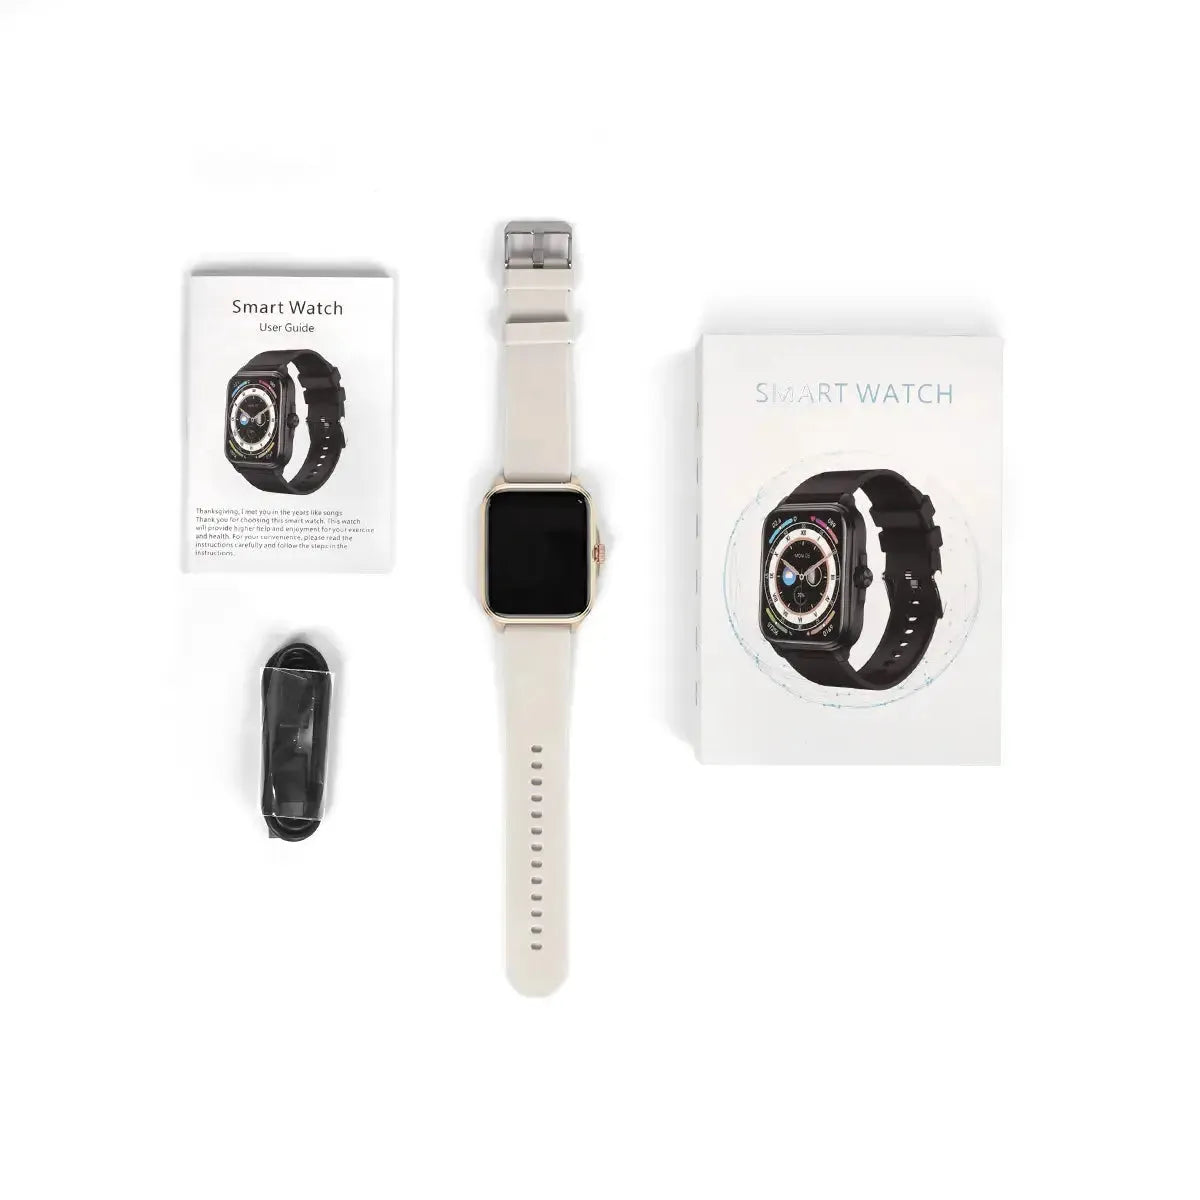 Tousains smartwatch P1 with all accessories